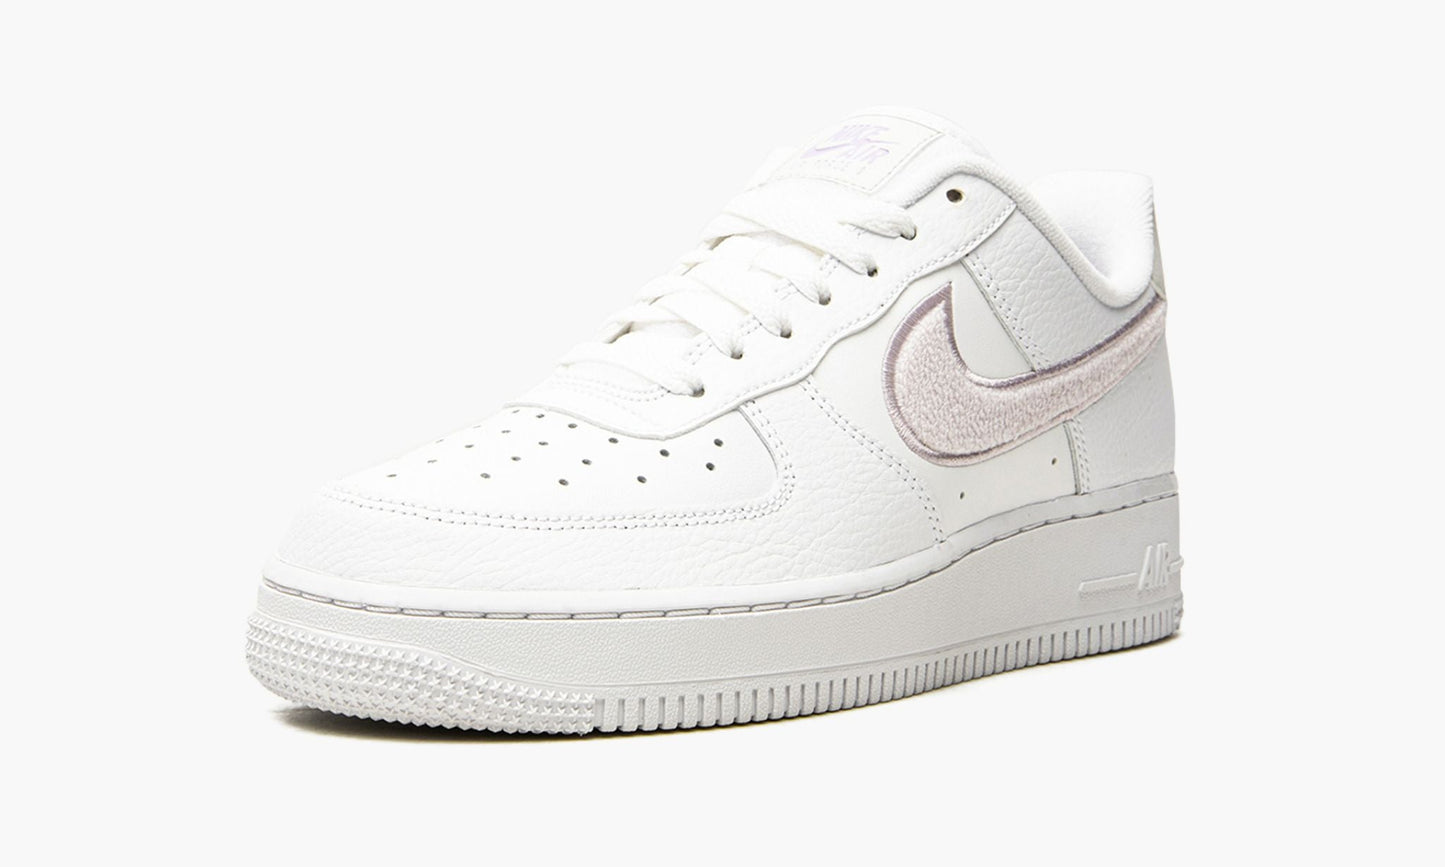 WMNS Air Force 1 Low "Chenille Swoosh - Sea Glass"